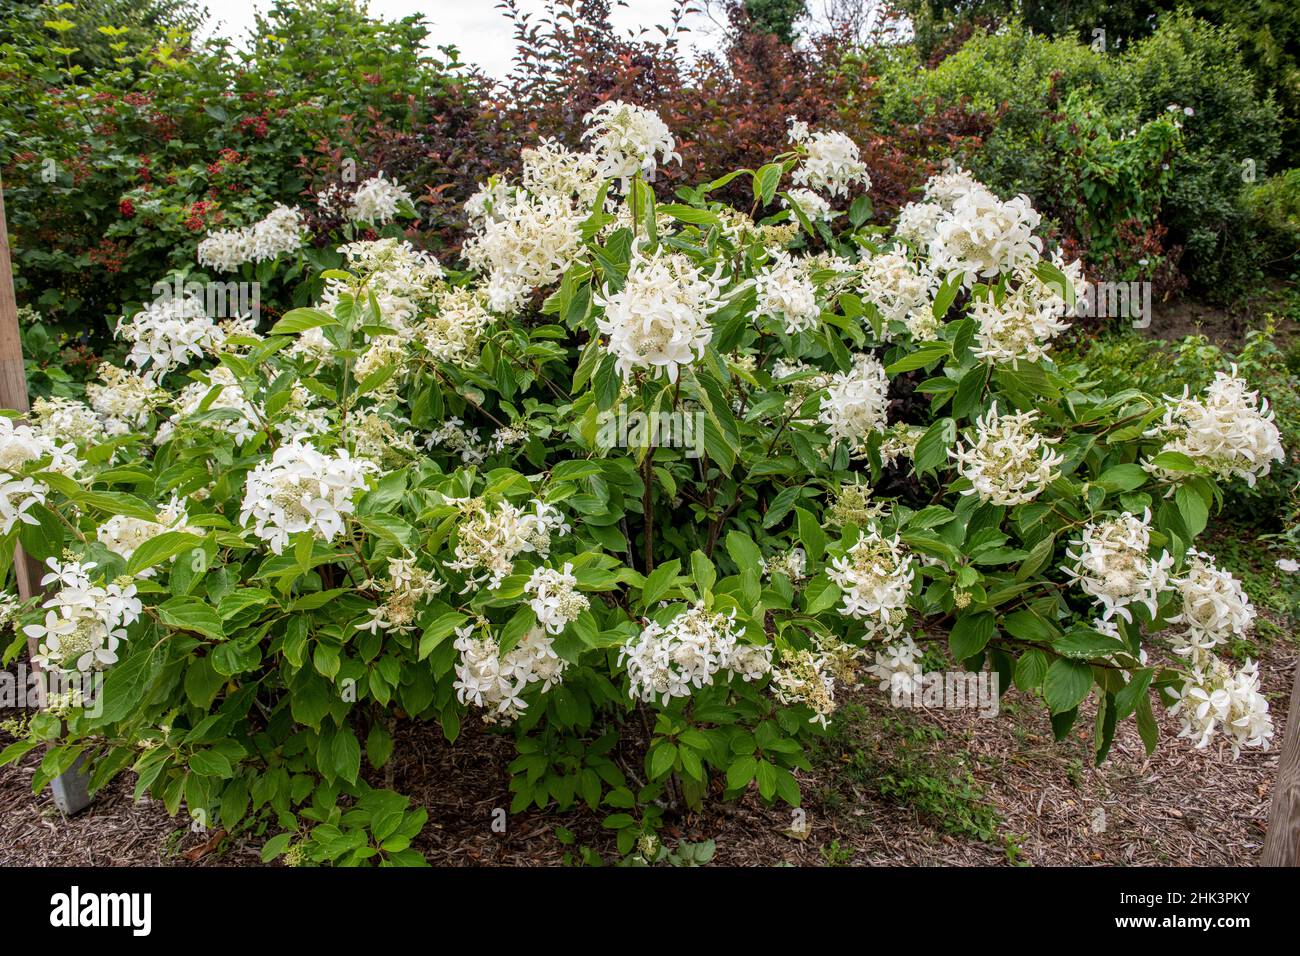 Panicled hydrangea (Hydrangea paniculata) in bloom in a garden, France, Finistere, summer Stock Photo